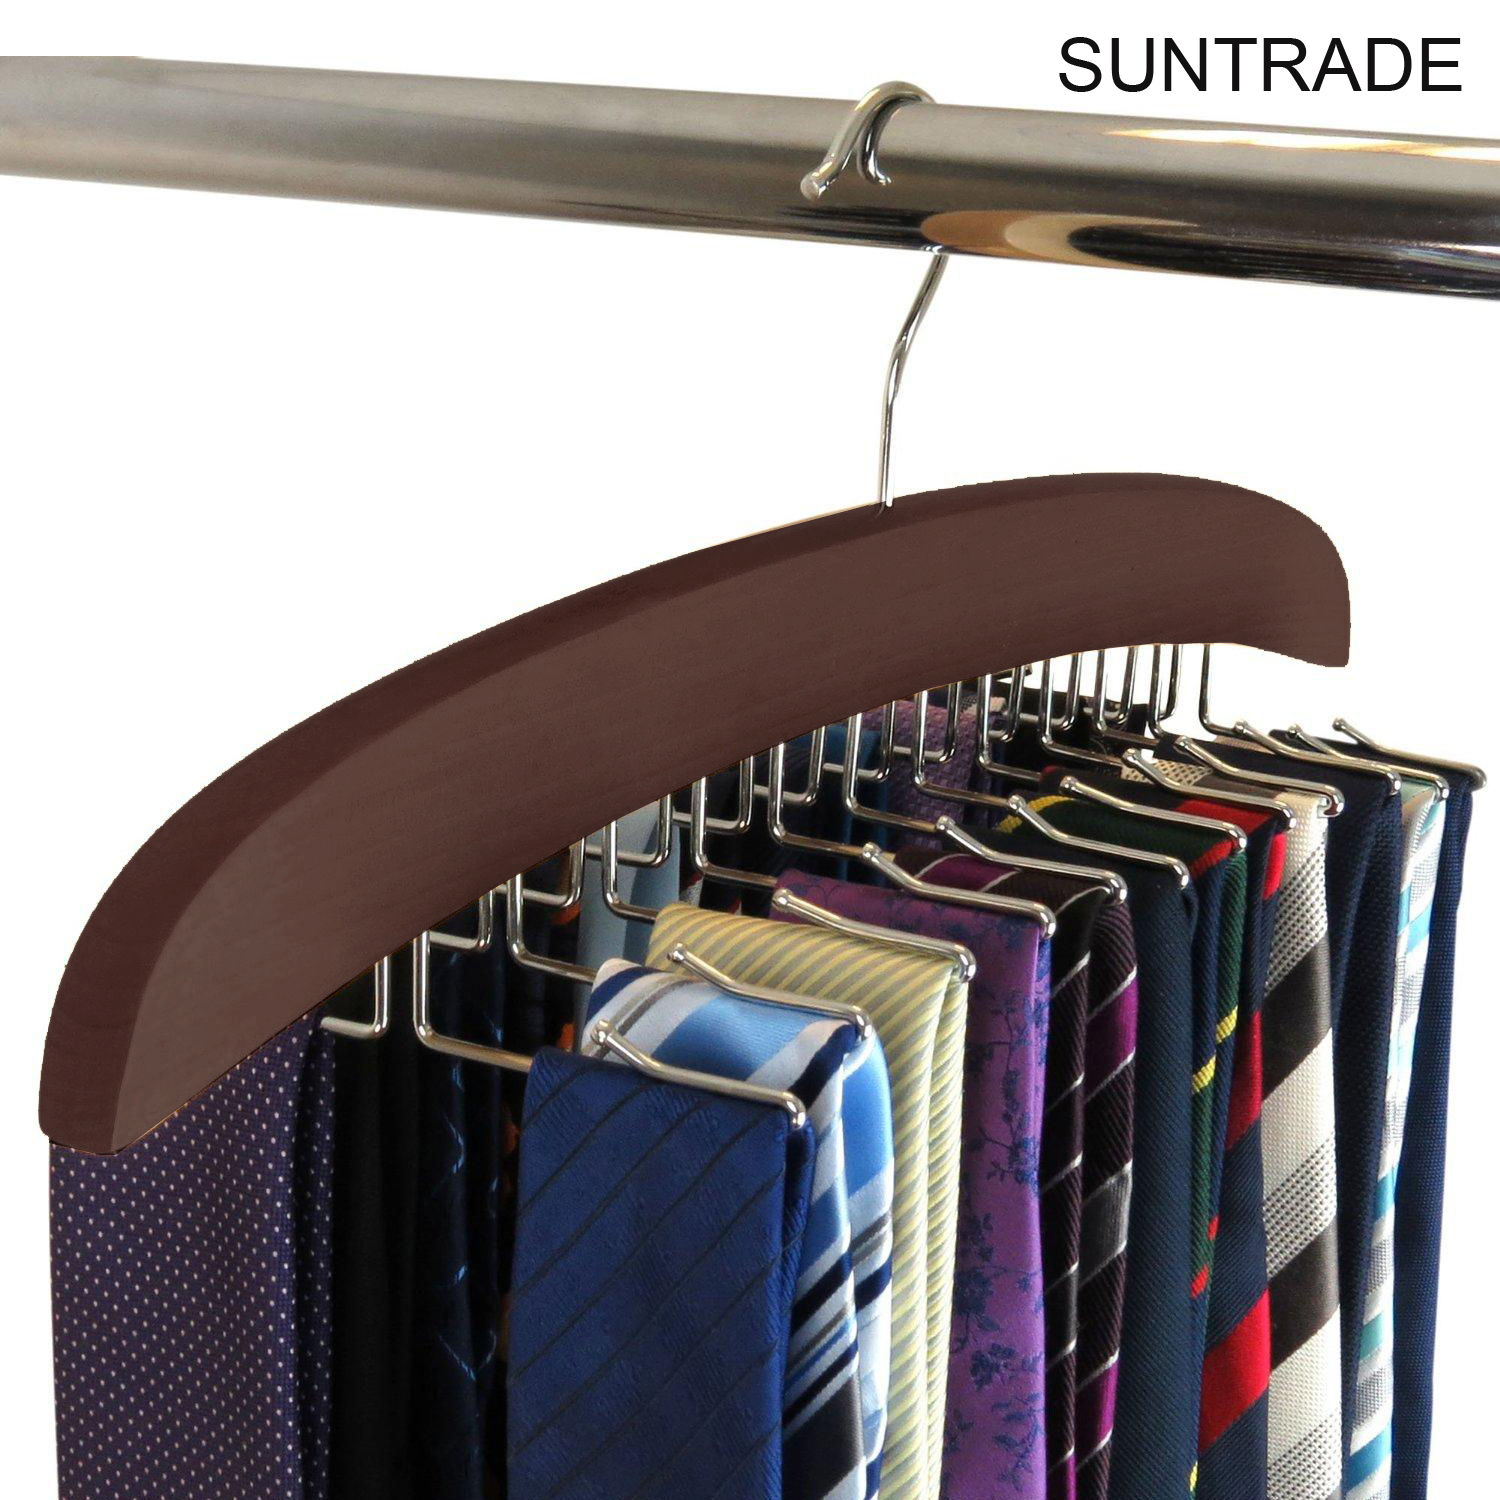 2, 4 Hooks SUNTRADE Wooden Belt Tie Rack Scarf Hanger for Closet，for Belts Tie Scarves Tank Top and Jewelry